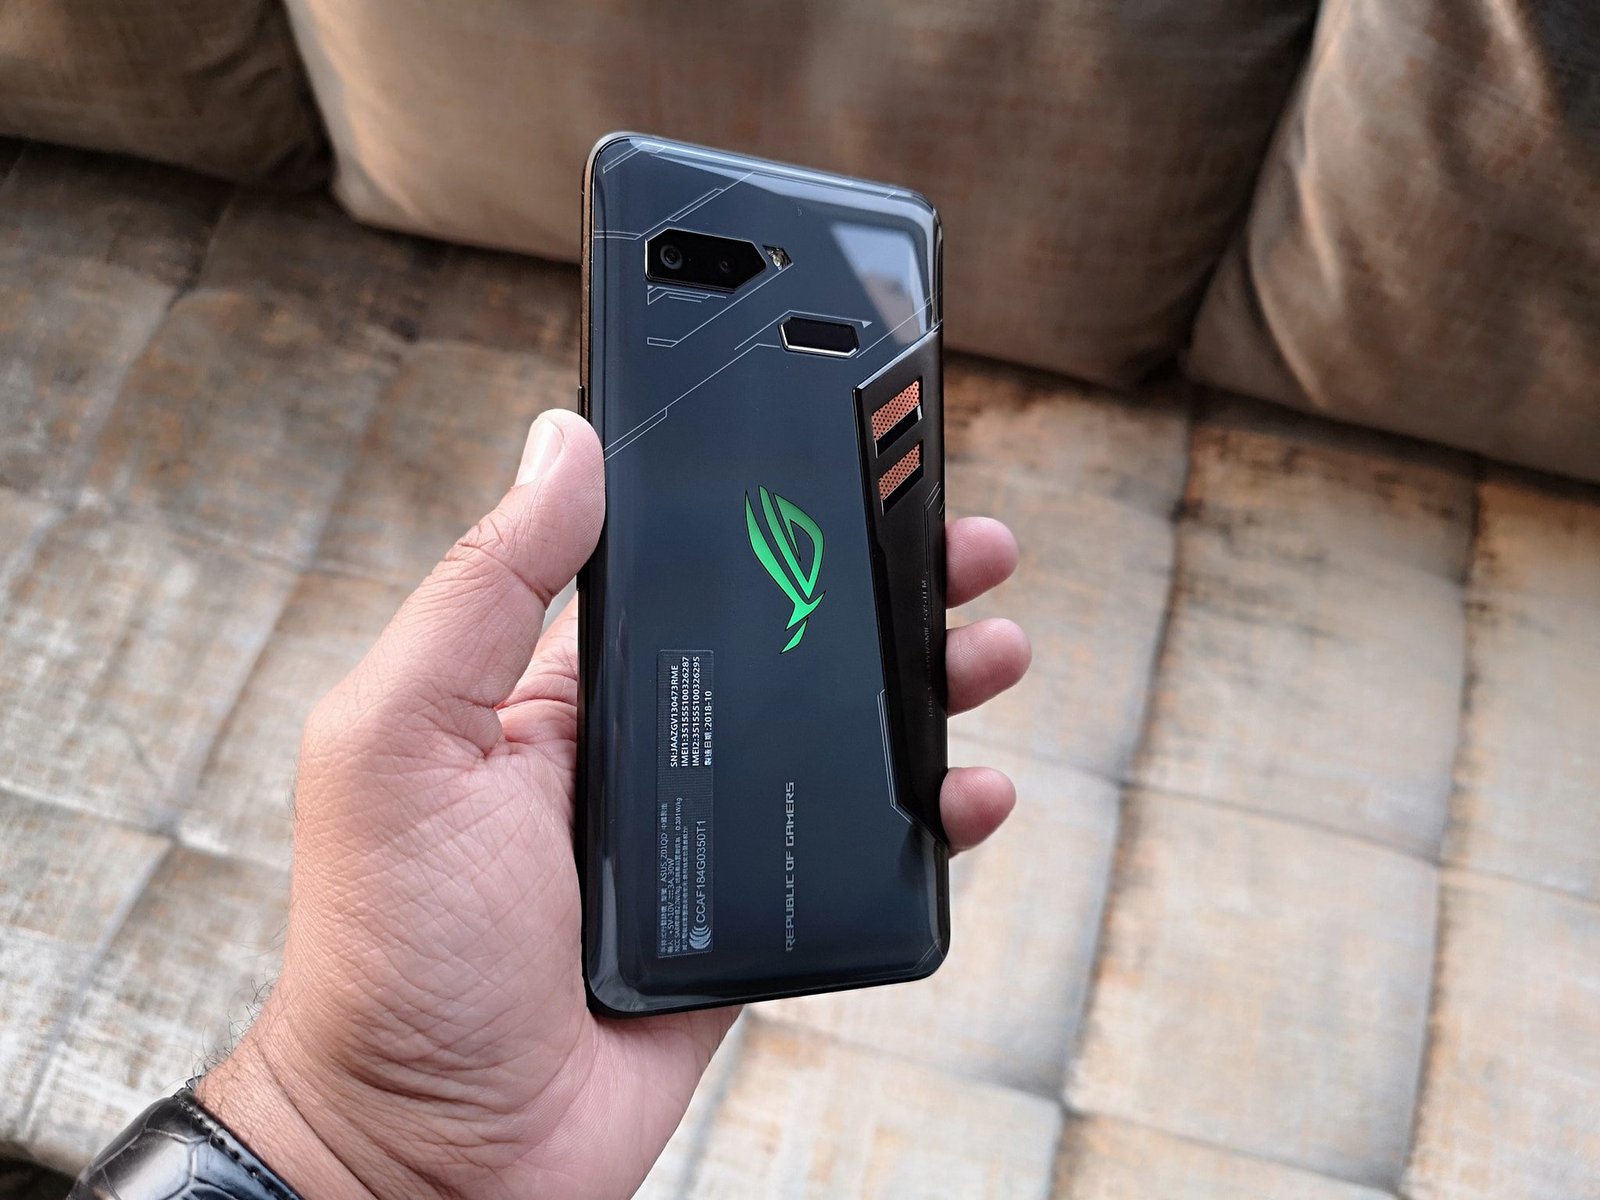 Asus ROG Phone to get Android Pie soon, spotted on GeekBench